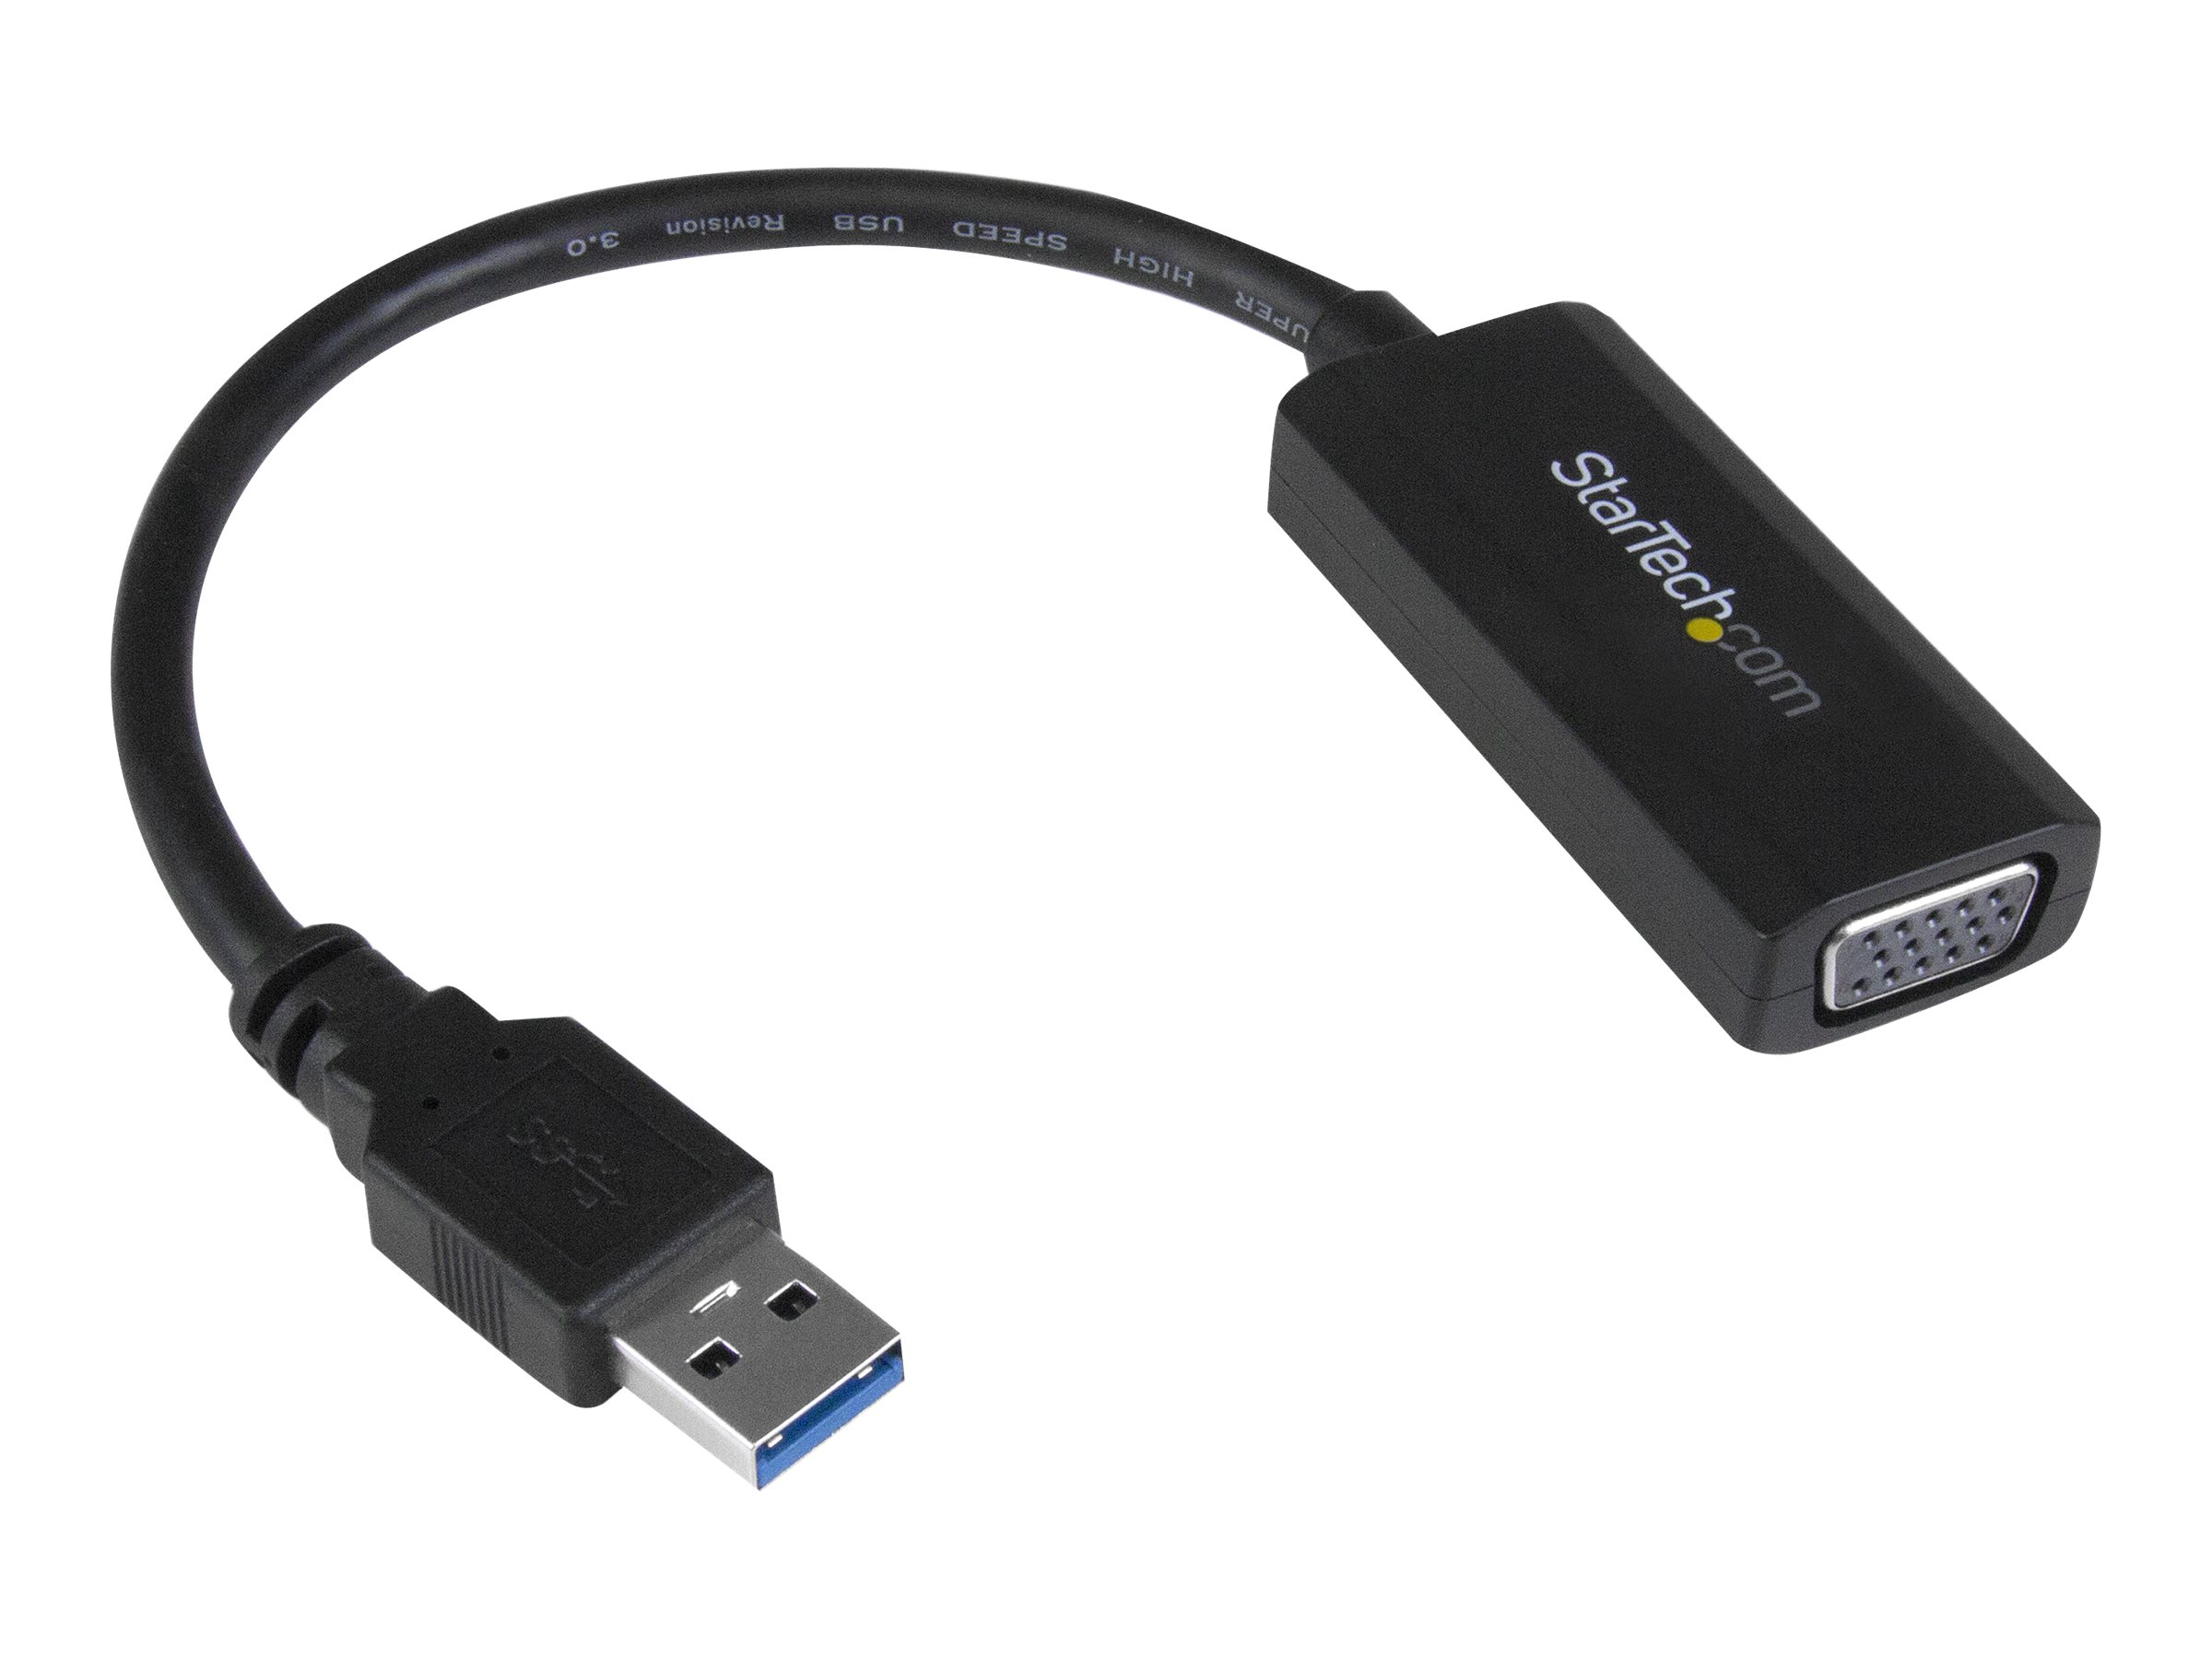 StarTech.com USB 3.0 to VGA Display Adapter 1920x1200, On-Board Driver Installation, Video Converter with External Graphics Card